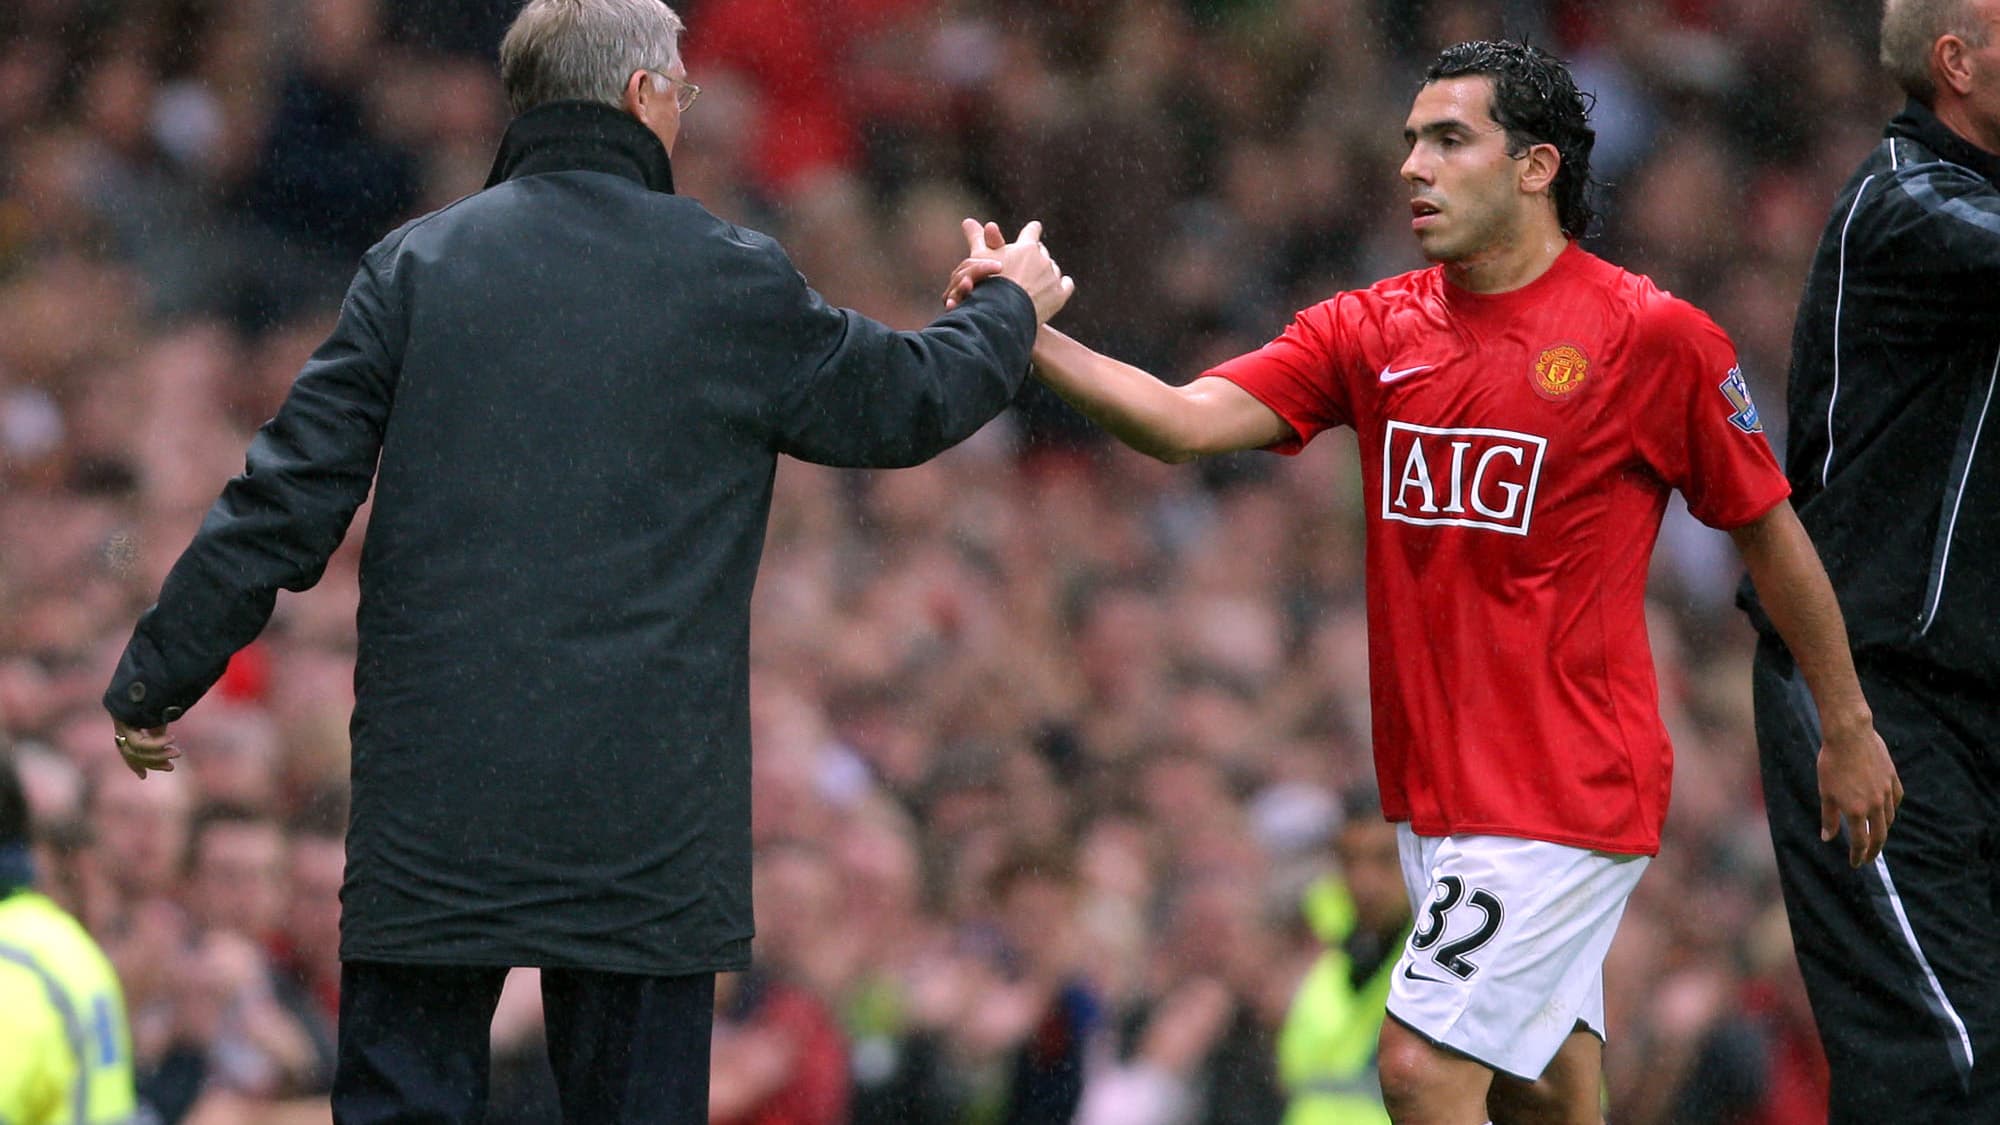 Why did Tevez not want to learn English when he played in the Premier League?